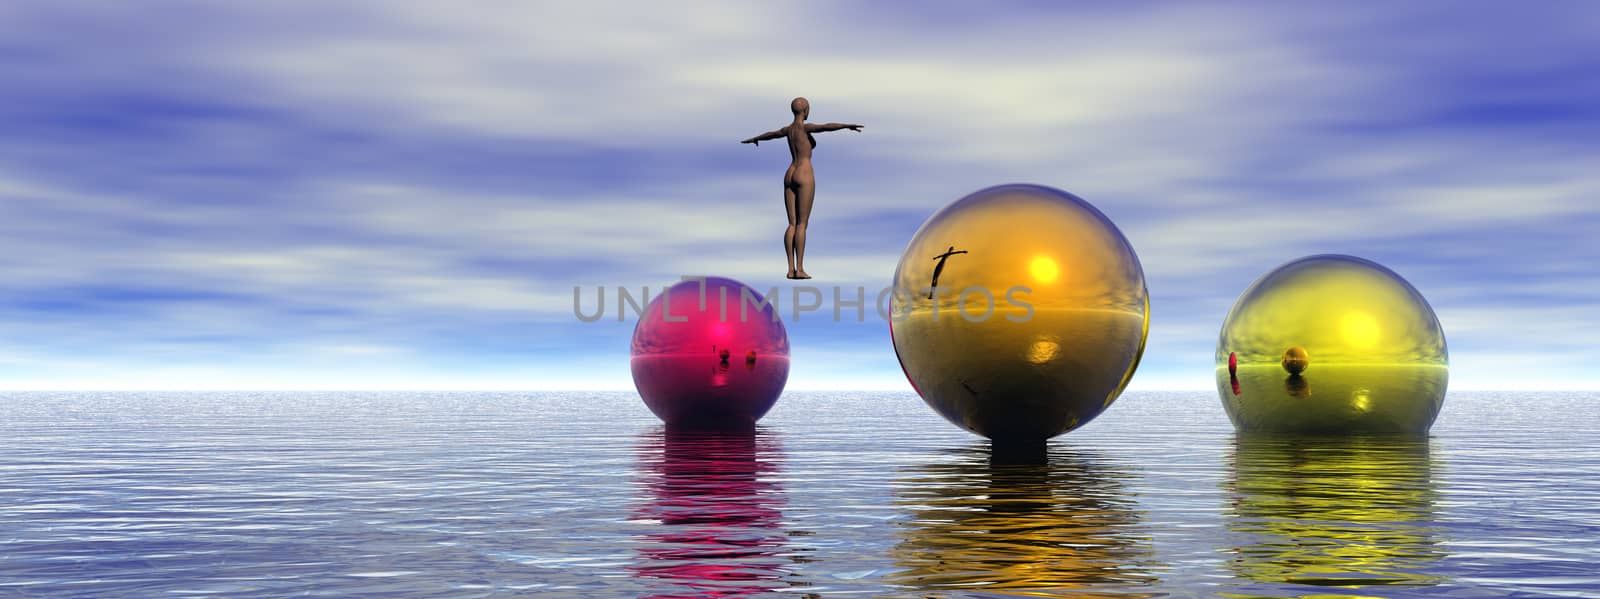 Dancer and colorful spheres by applesstock